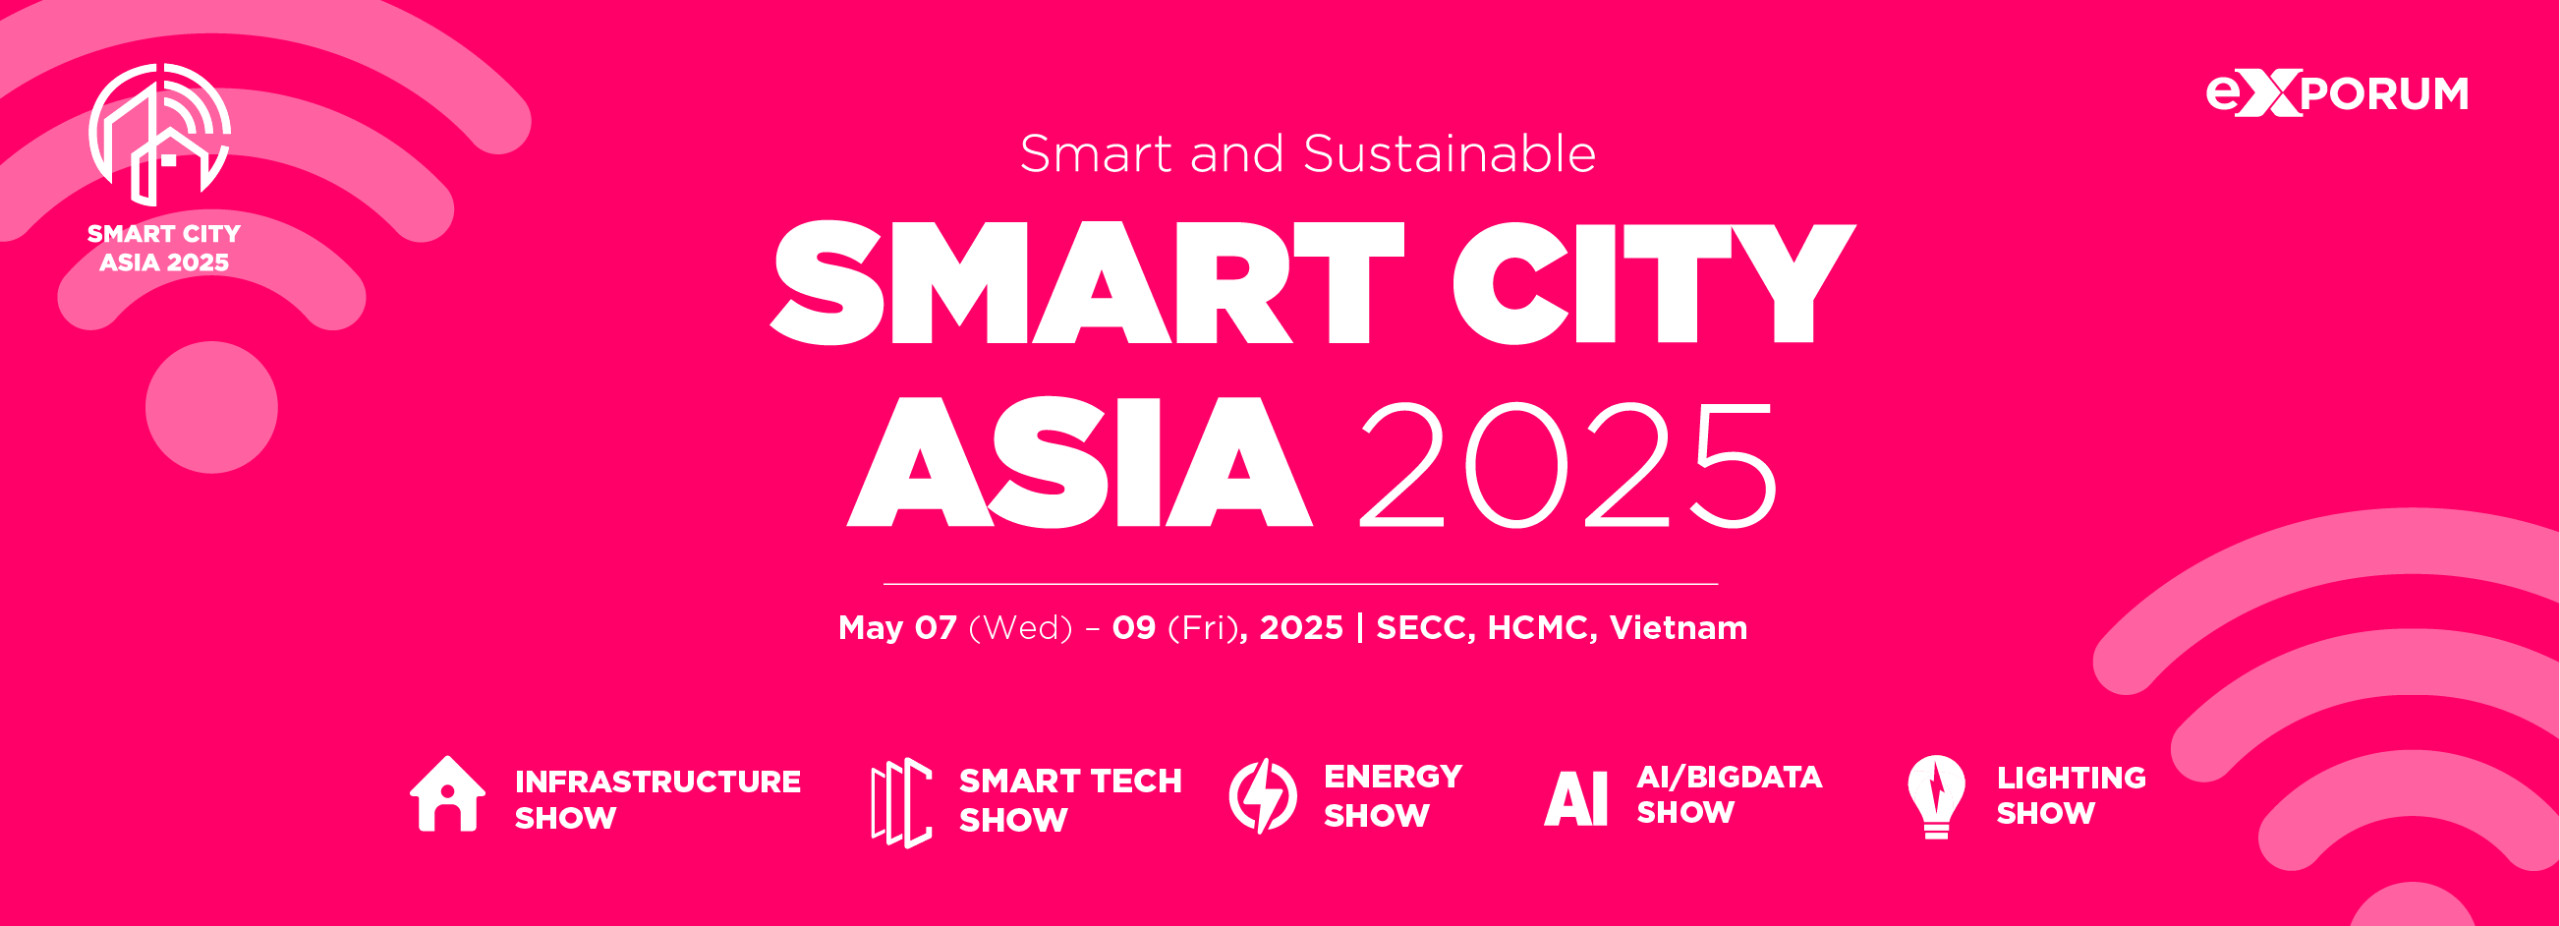 SMART CITY ASIA 2025 - SMART AND SUSTAINABLE, SECC, Ho Chi Minh City, District 7, Vietnam,Ho Chi Minh,Vietnam